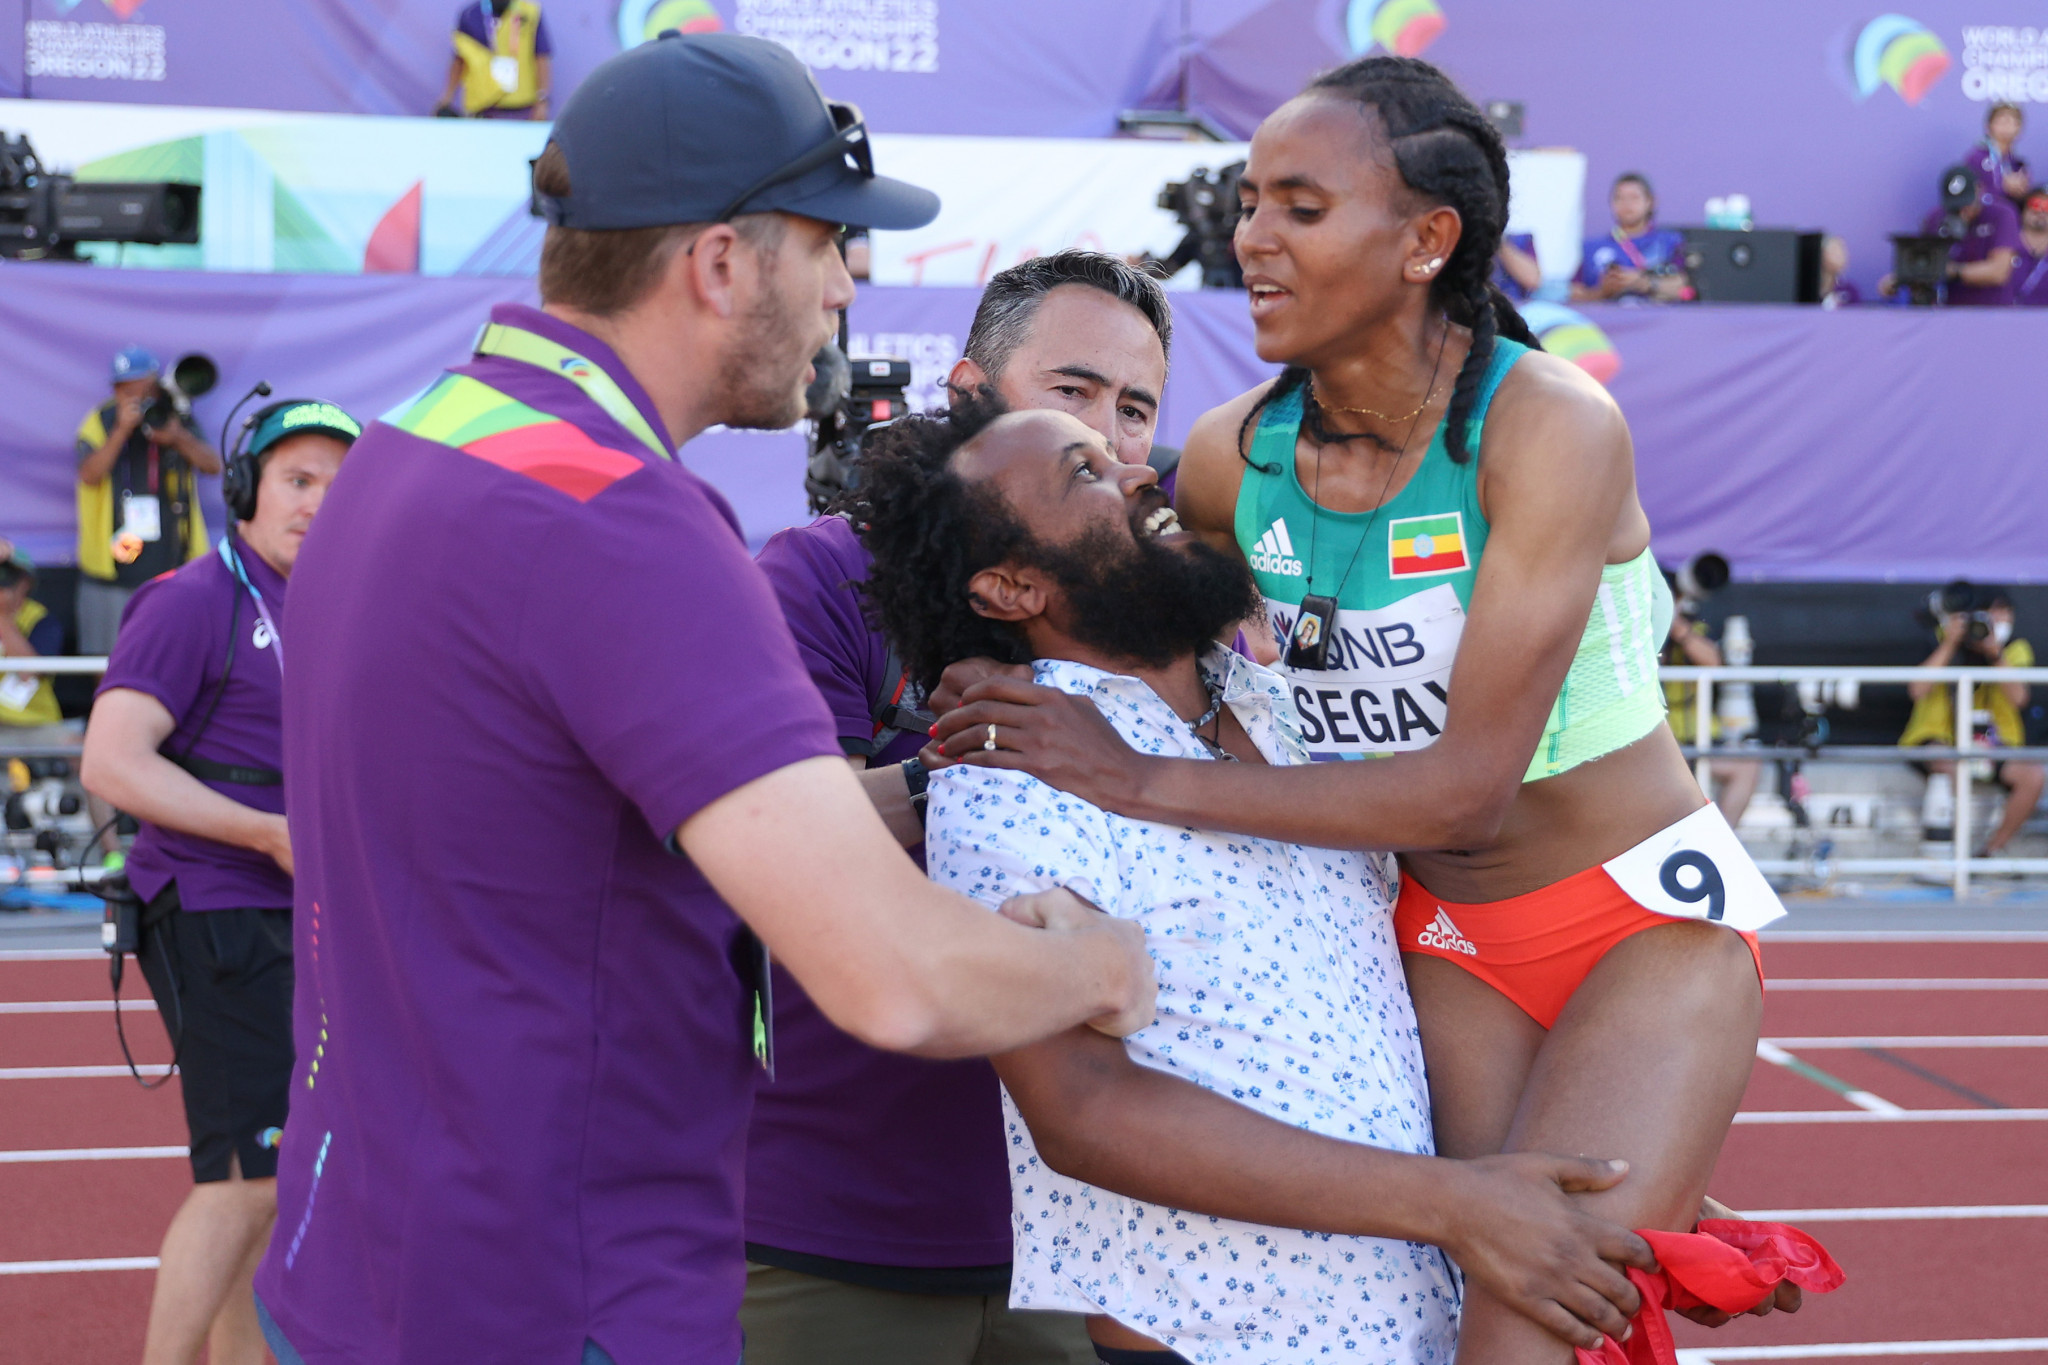 A spectator tried to lift Tsegay after she won gold in the Women's 5,000m ©Getty Images
